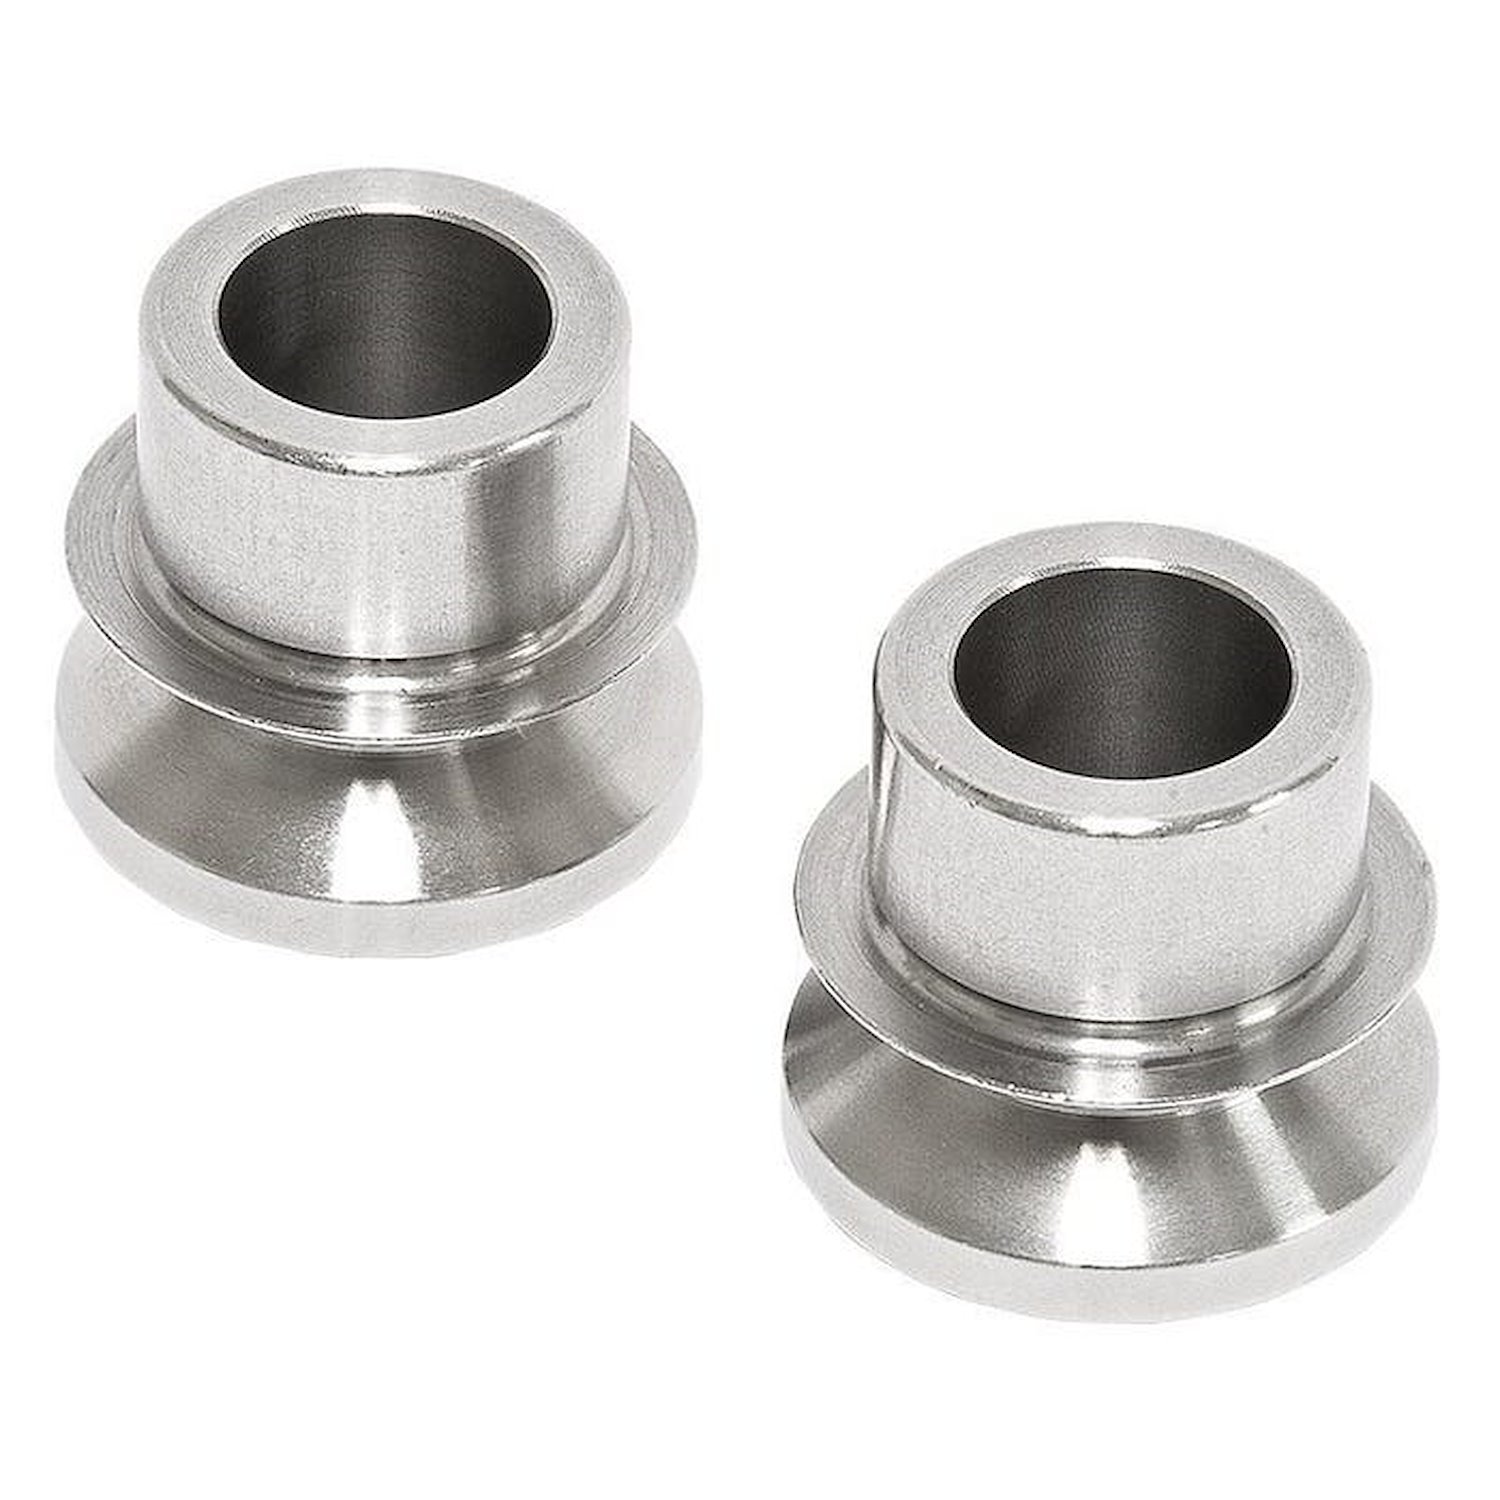 186009-KIT Misalignment Spacers, 3/4" to 5/8"